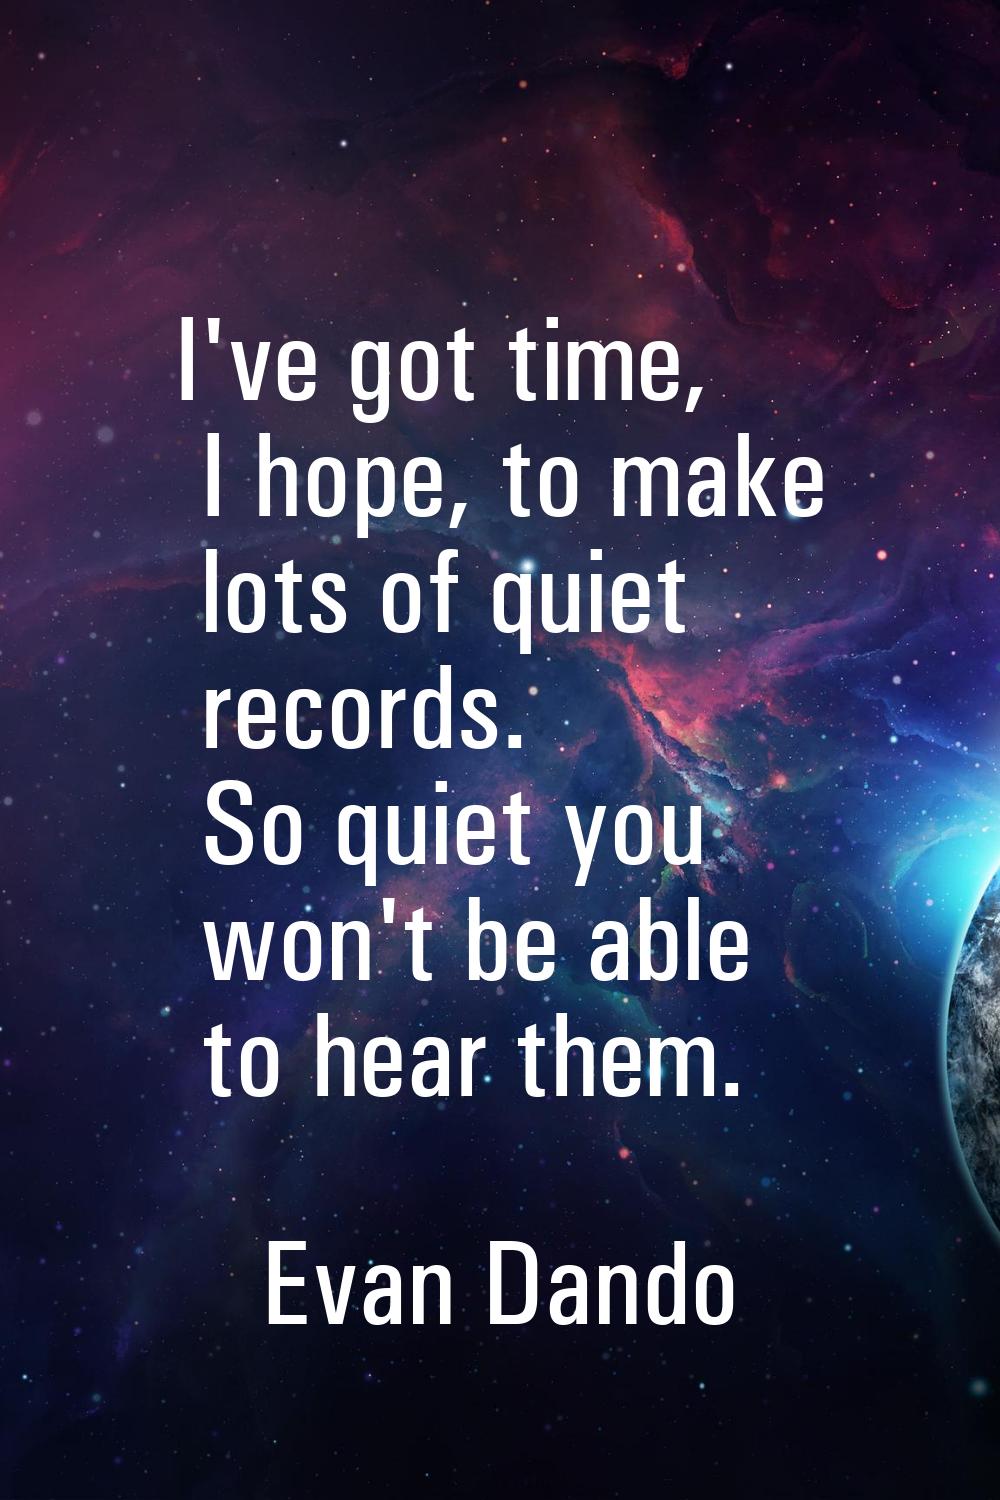 I've got time, I hope, to make lots of quiet records. So quiet you won't be able to hear them.